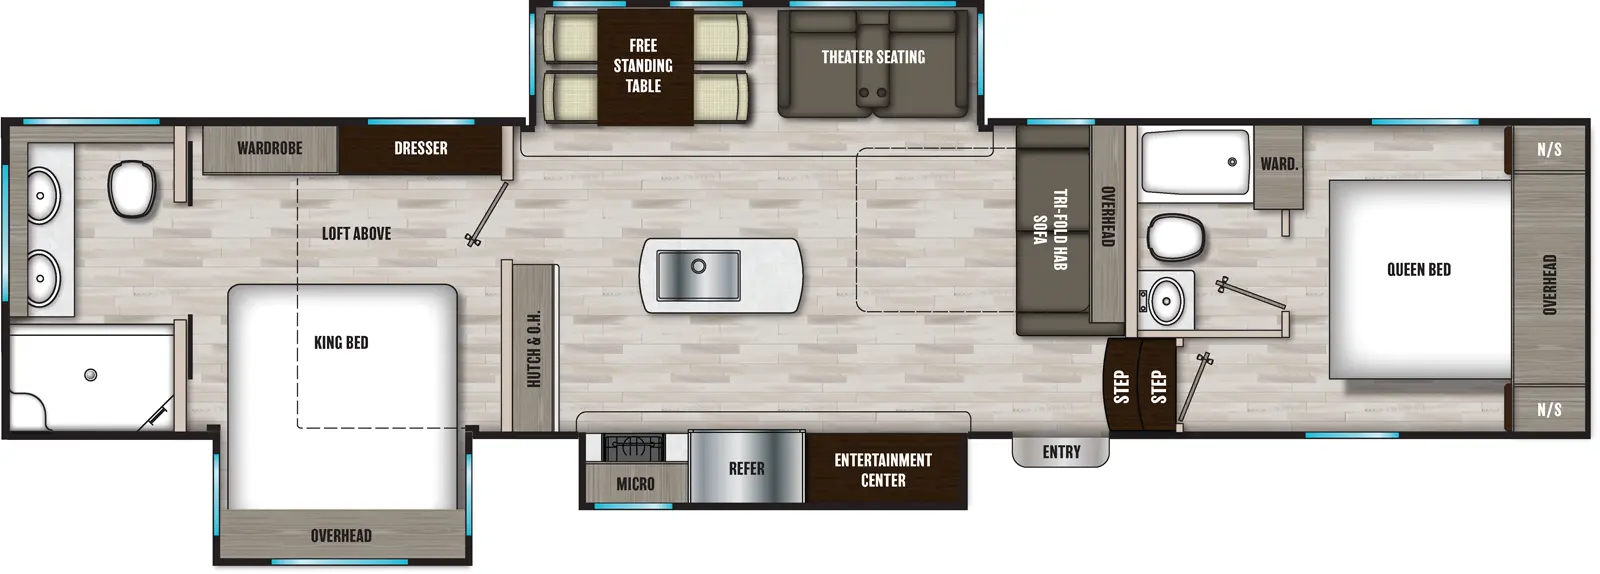 The 381DBL has three slideouts and one entry. Interior layout front to back: foot facing queen bed with overhead cabinet and night stands on each side; off-door side wardrobe and full bathroom accessible from bedroom; two steps down to main living area and entry; tri-fold hide-a-bed sofa with overhead cabinet along inner wall; off-door side slideout with theater seating and free-standing table; kitchen island with sink; door side slideout with entertainment center, refrigerator, microwave and counter; hutch and overhead cabinet along inner wall; loft above rear bedroom; bedroom with door side king bed slideout with overhead cabinet, and off-door side dresser and wardrobe; rear full bathroom with dual sinks.